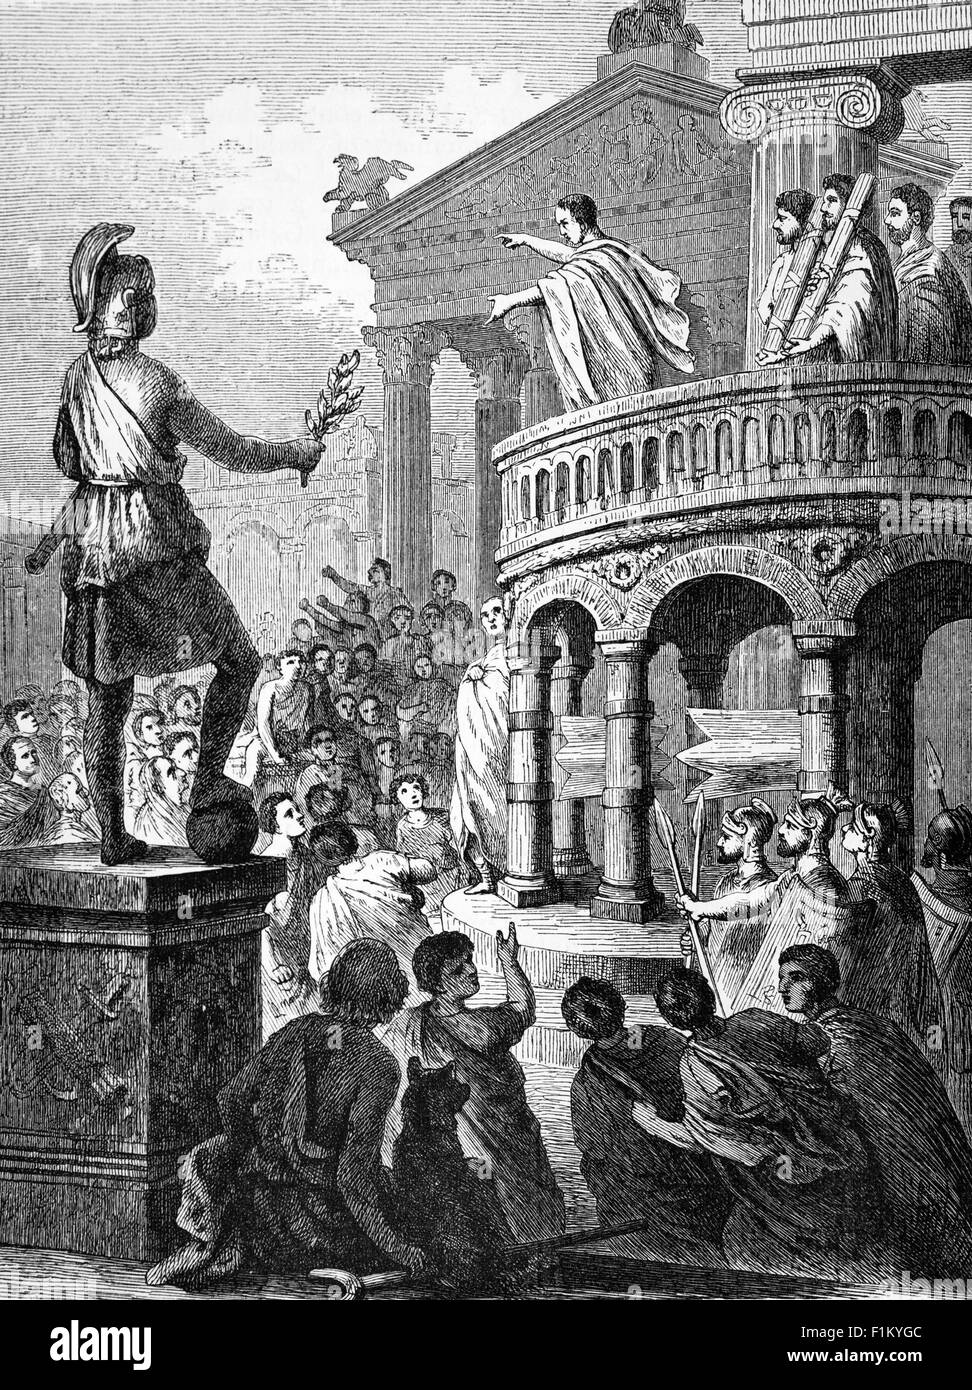 A consul addressing the crowds. It was the highest elected political office of the Roman Republic, and the consulship was considered the highest level of the cursus honorum (the sequential order of public offices through which aspiring politicians sought to ascend). Each year, two consuls were elected together, to serve for a one-year term. Addressing the Romans, First Century BC Stock Photo